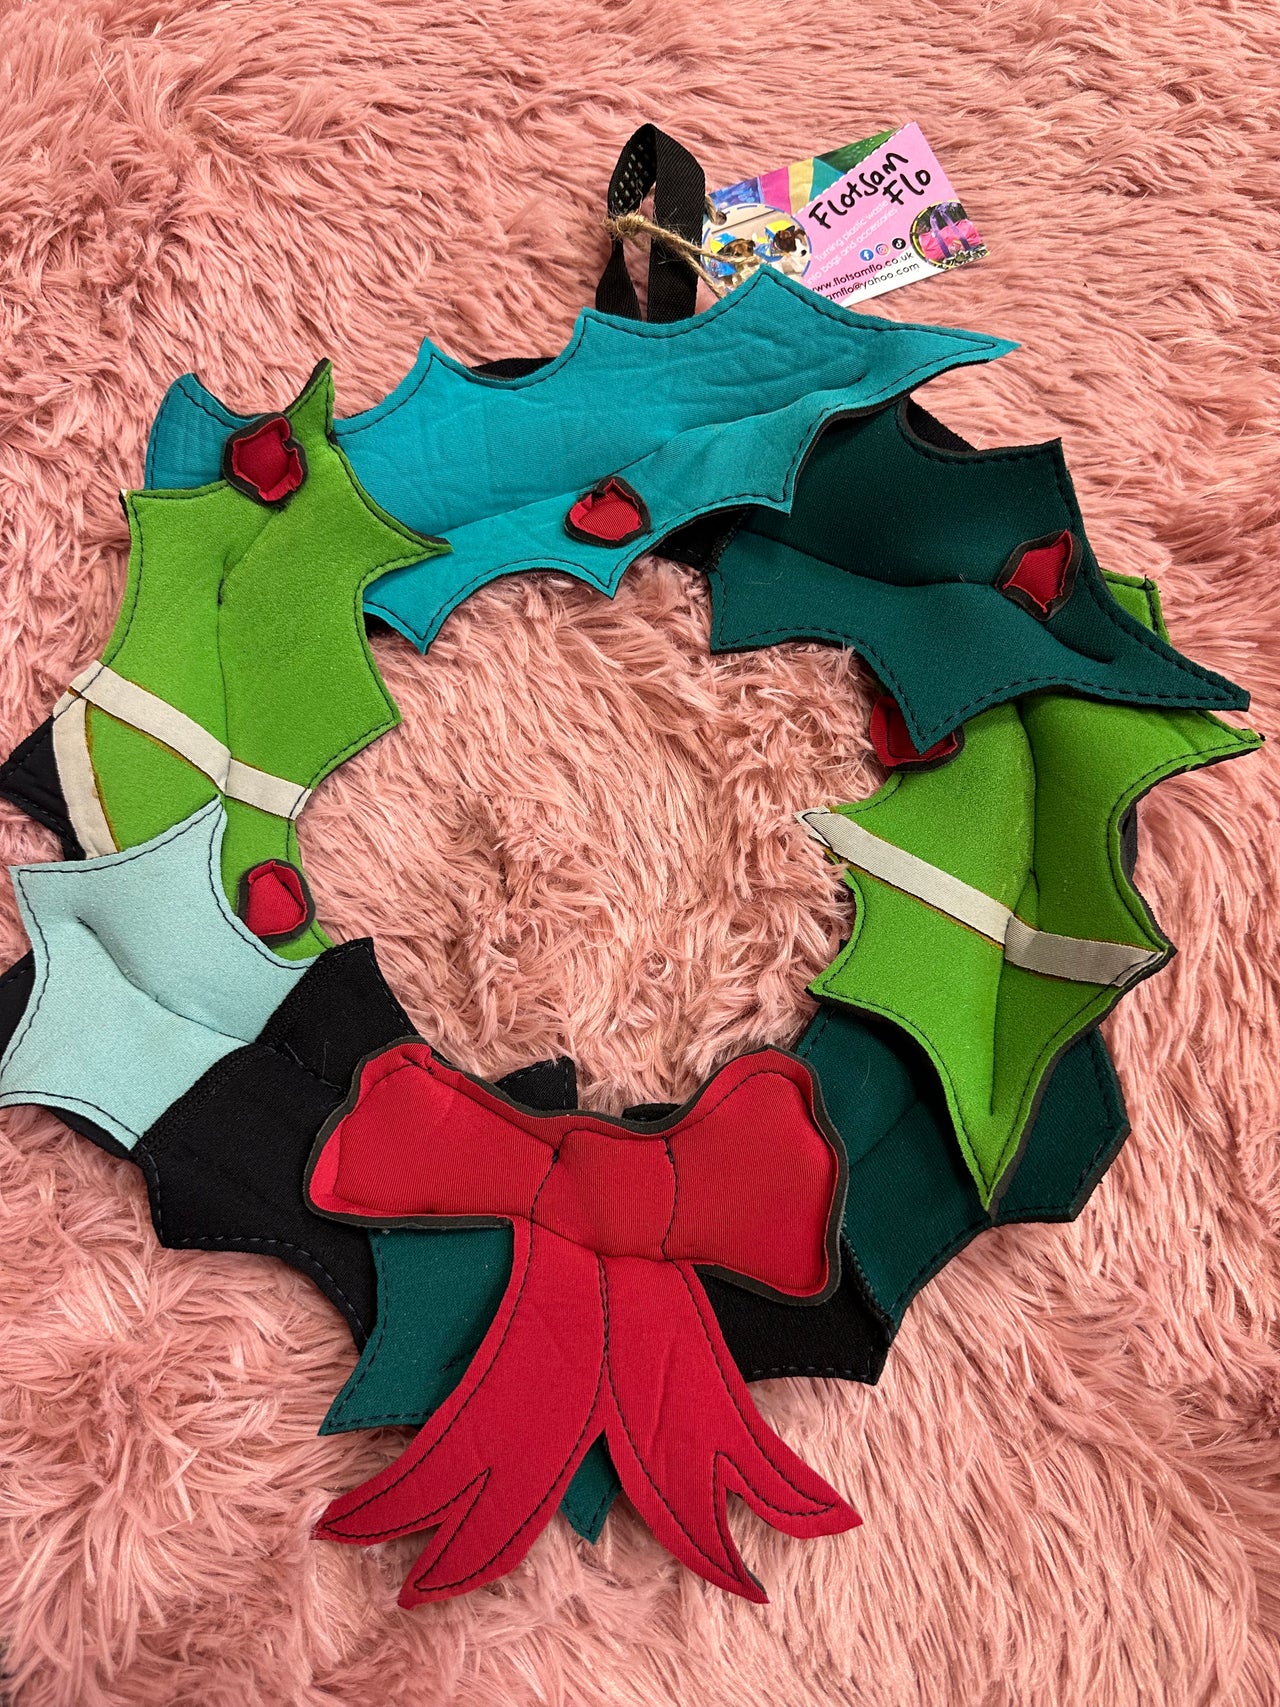 I used to be a Broken Wetsuit - Larger Christmas wreath Decoration - Handmade and Upcycled